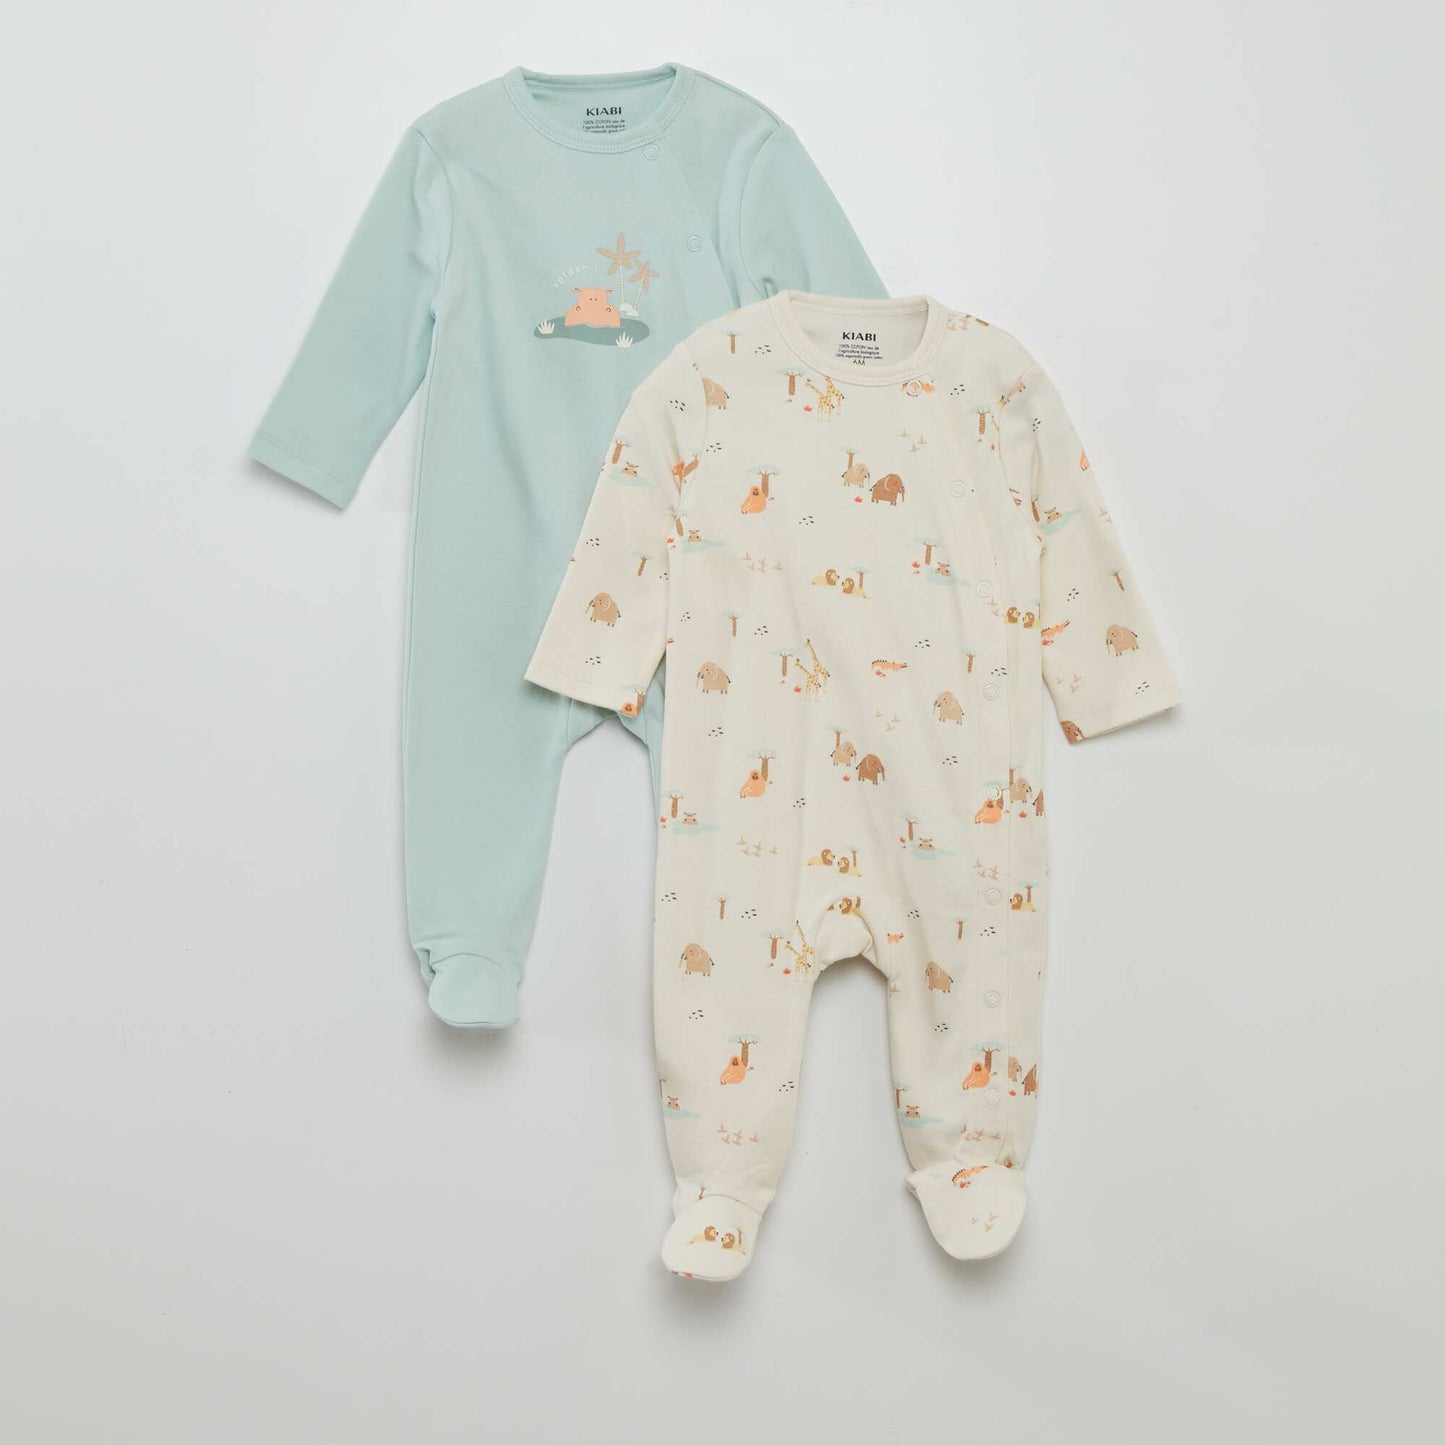 Pack of printed sleepsuits - Pack of 2 WHITE